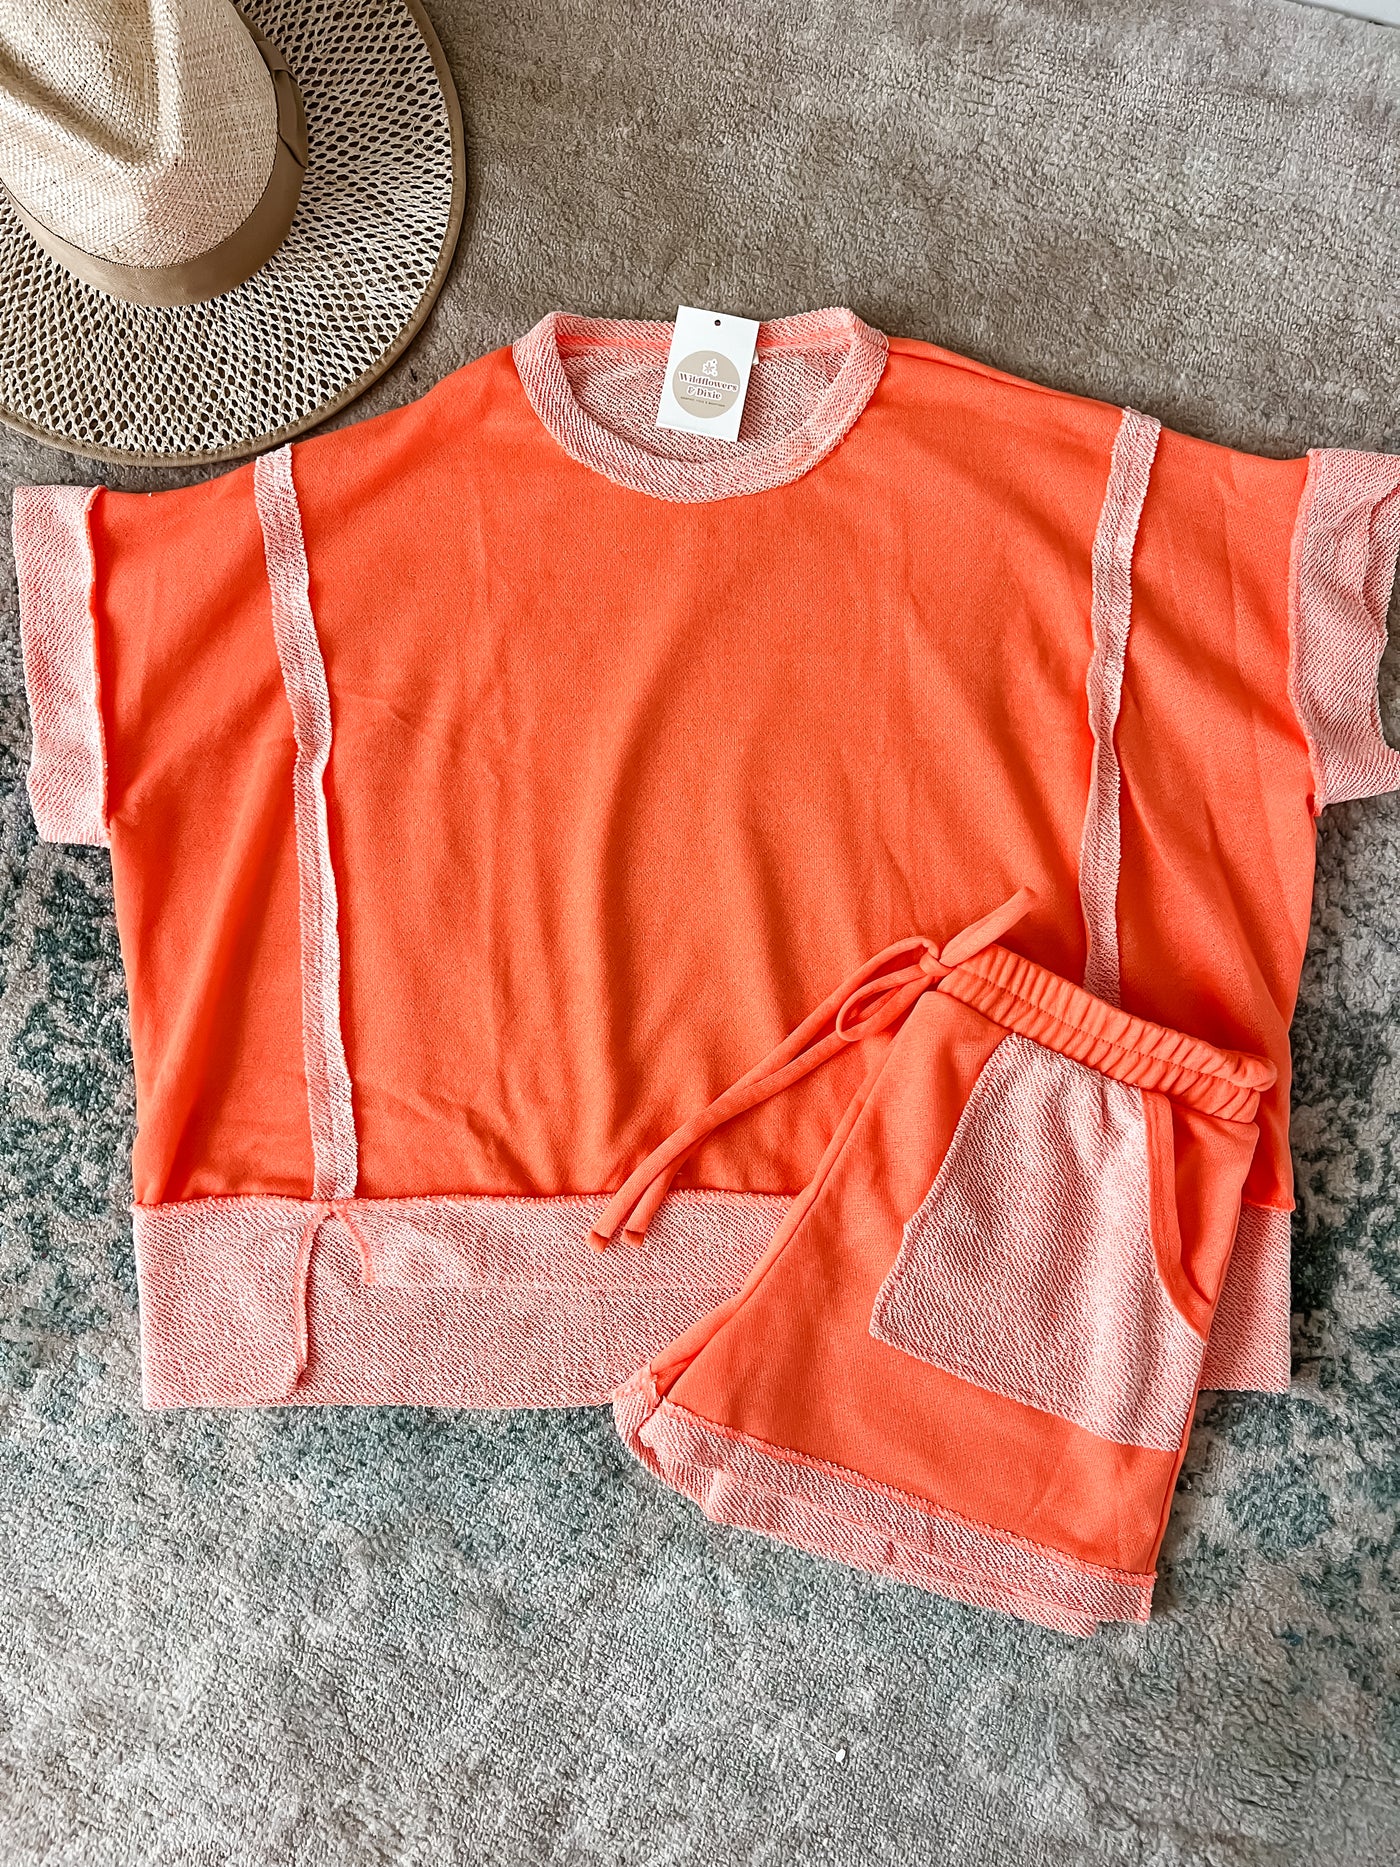 Comfy Days French Terry Lounge Set - Orange